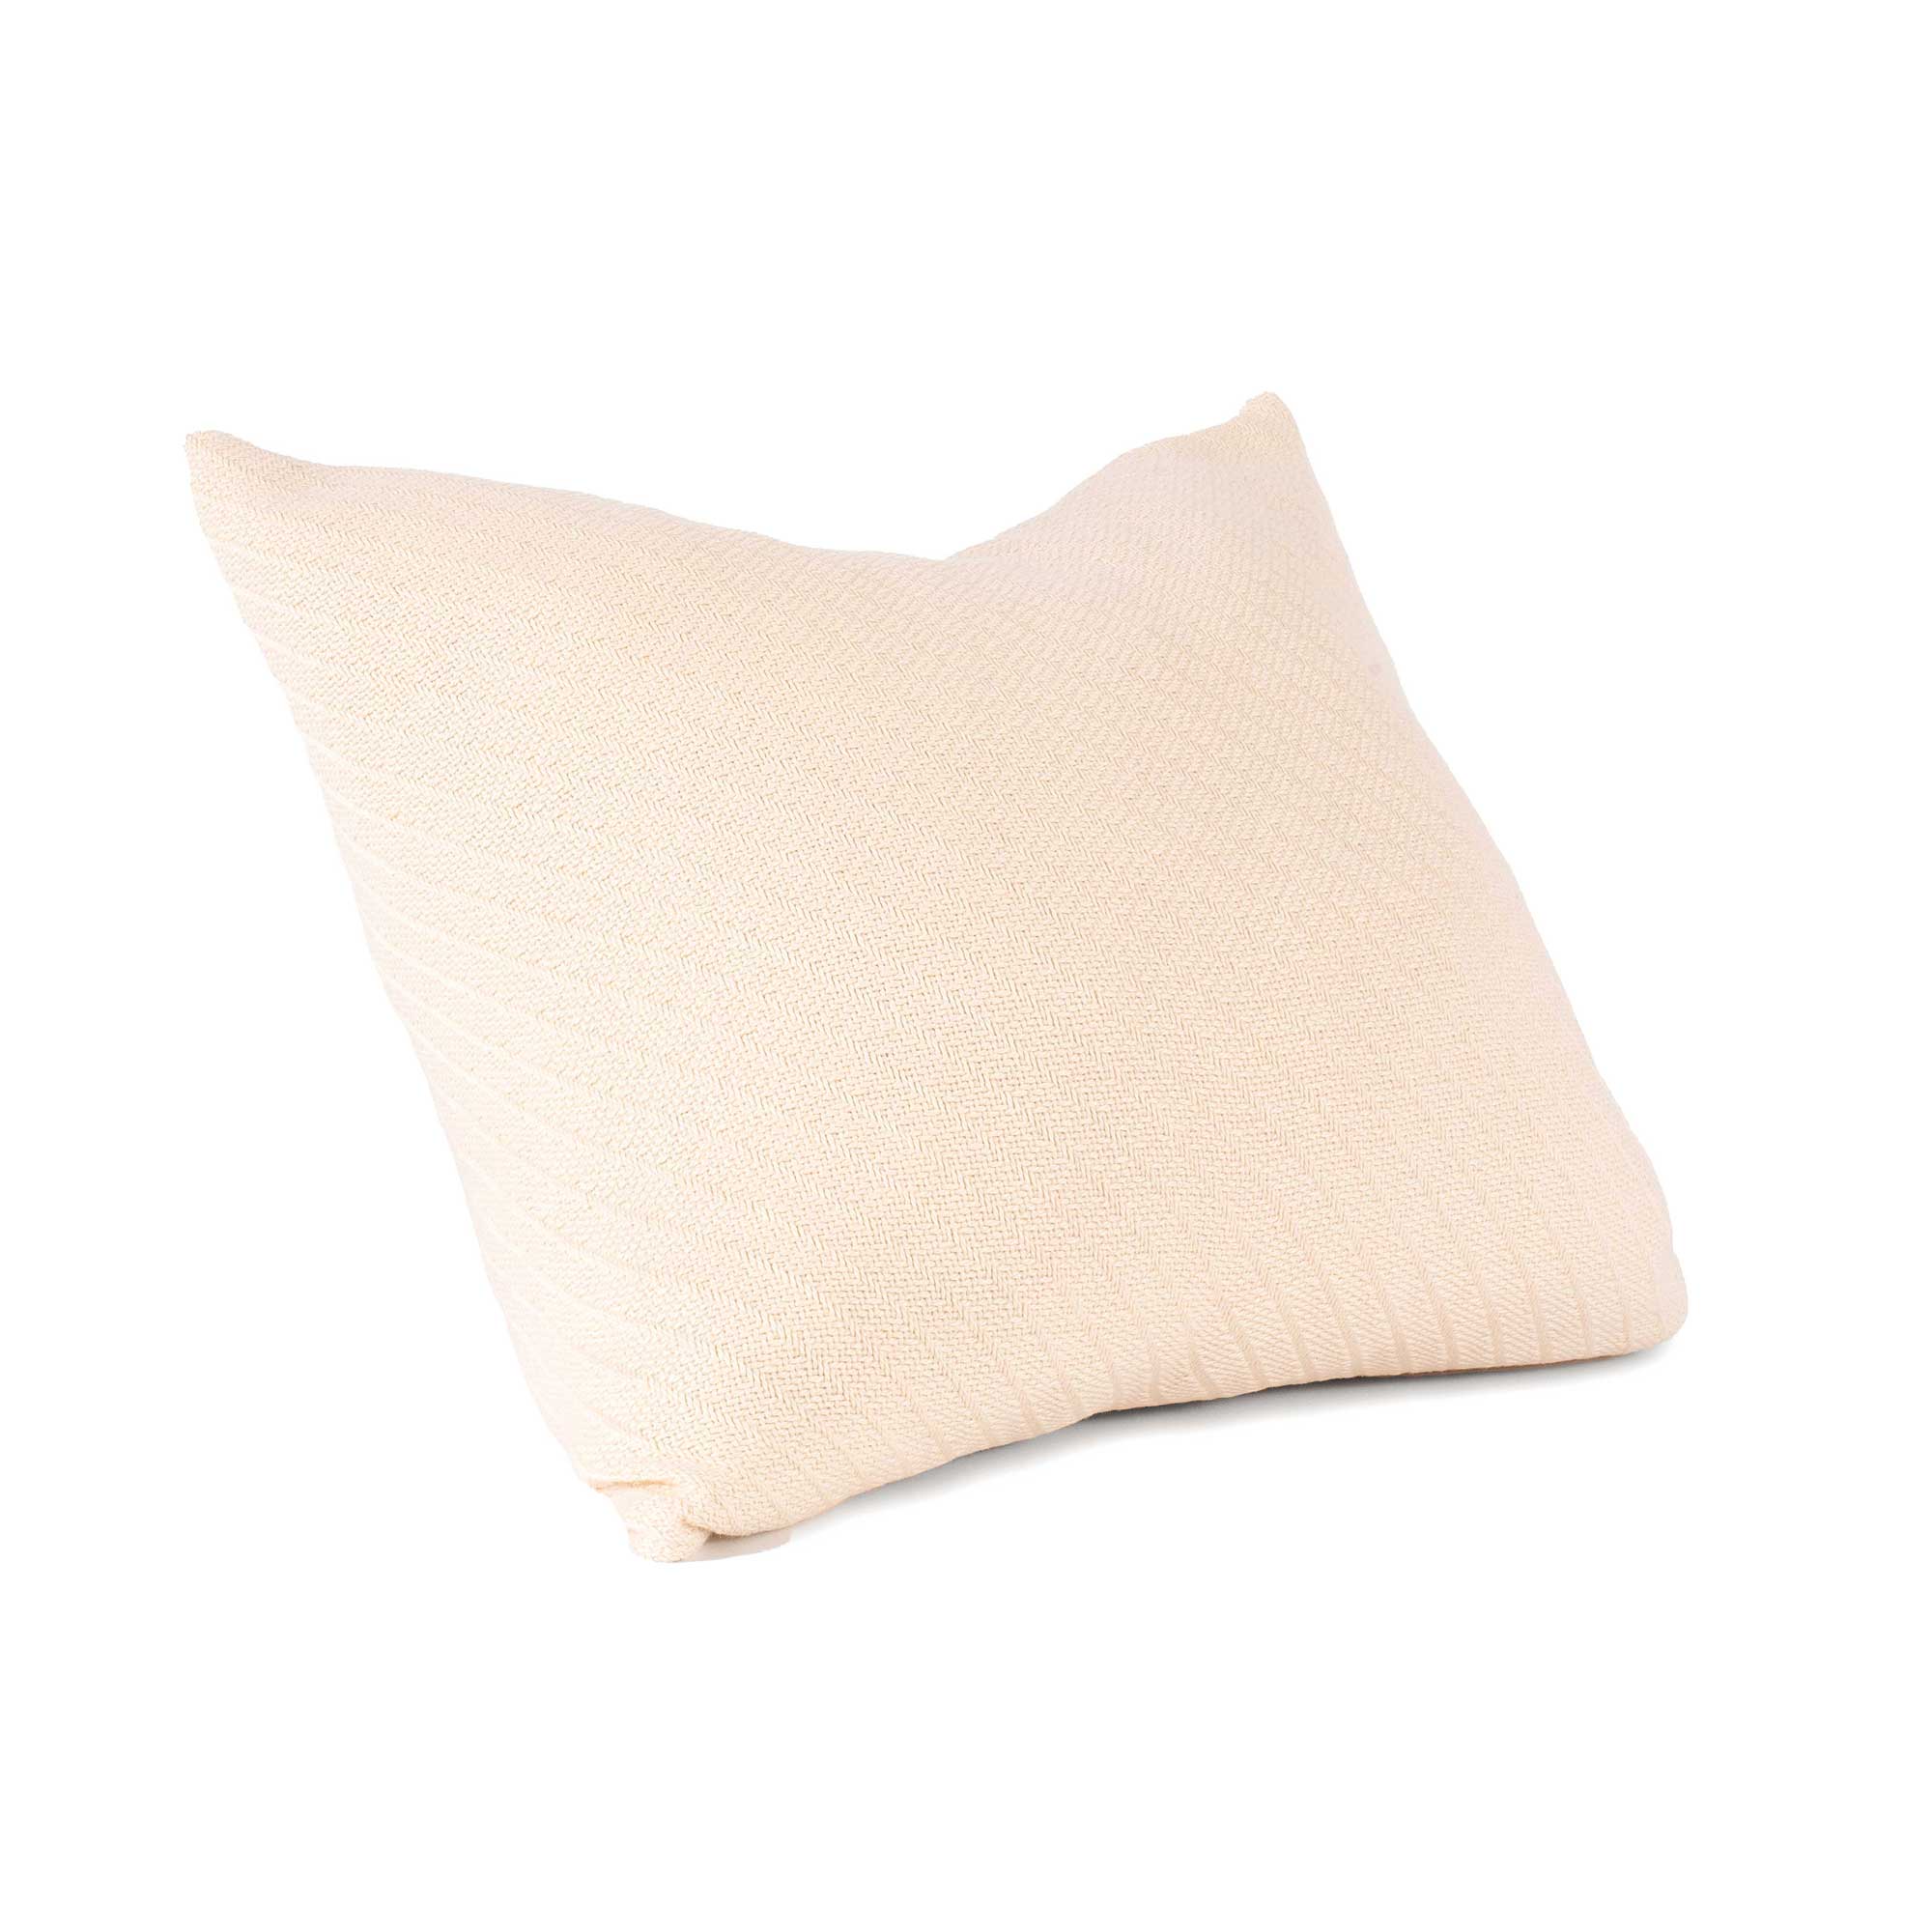 Best Throw Pillows - Luster Loft by American Blanket Company